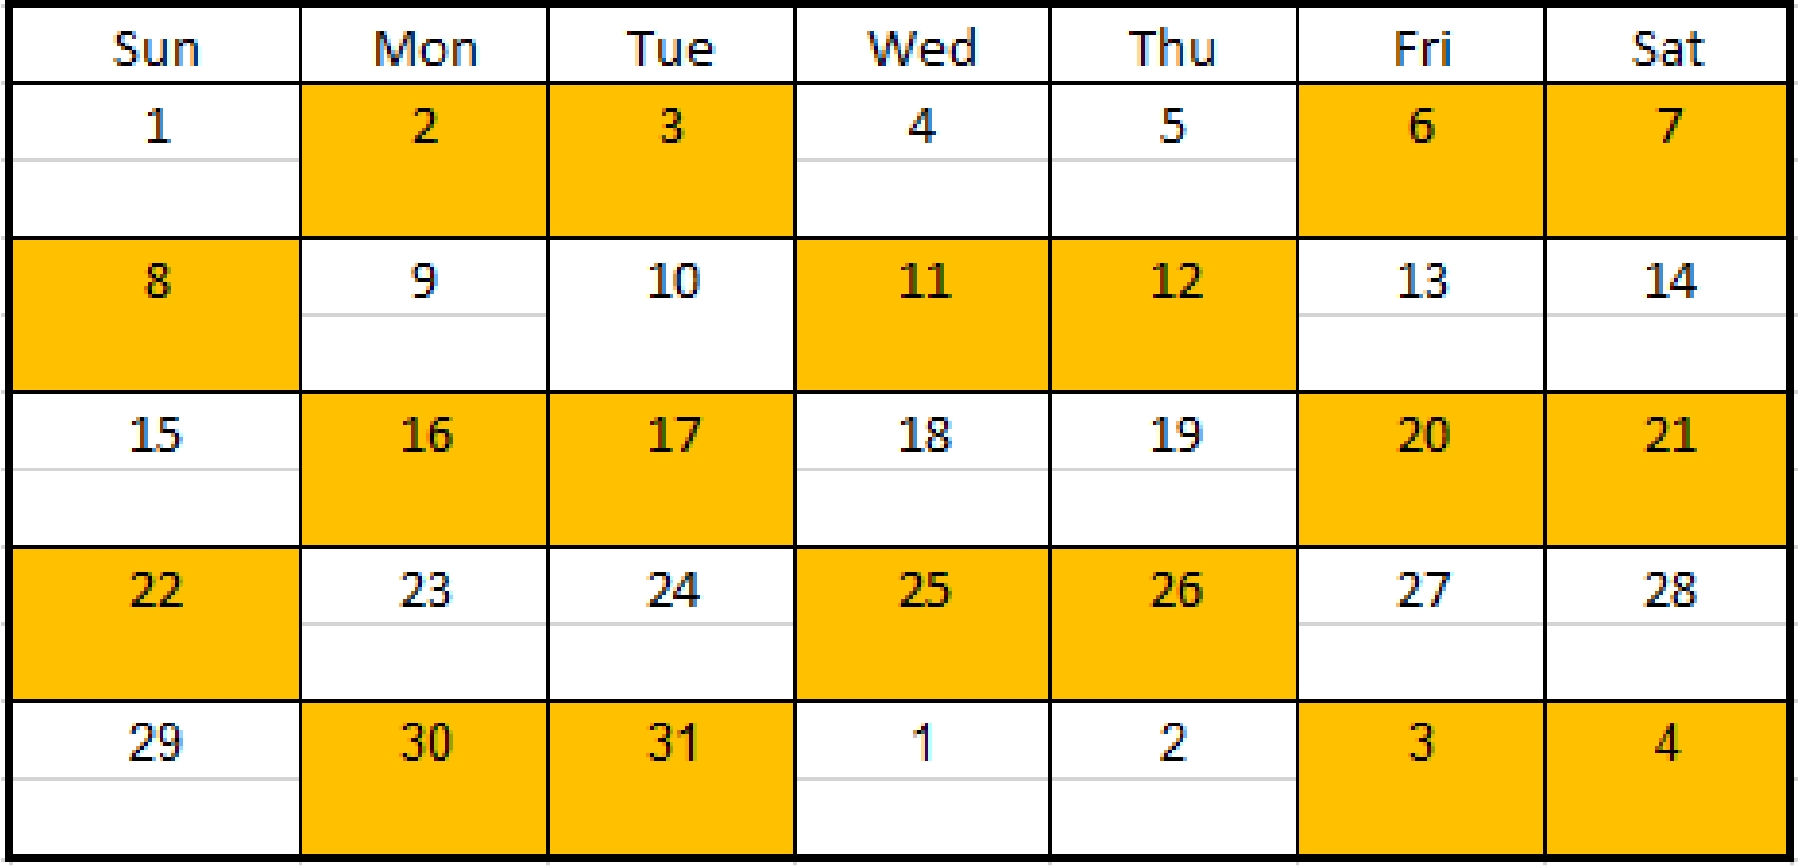 Calendar showing shift schedules. White is Group H and I and Yellow is Group J and Group K.